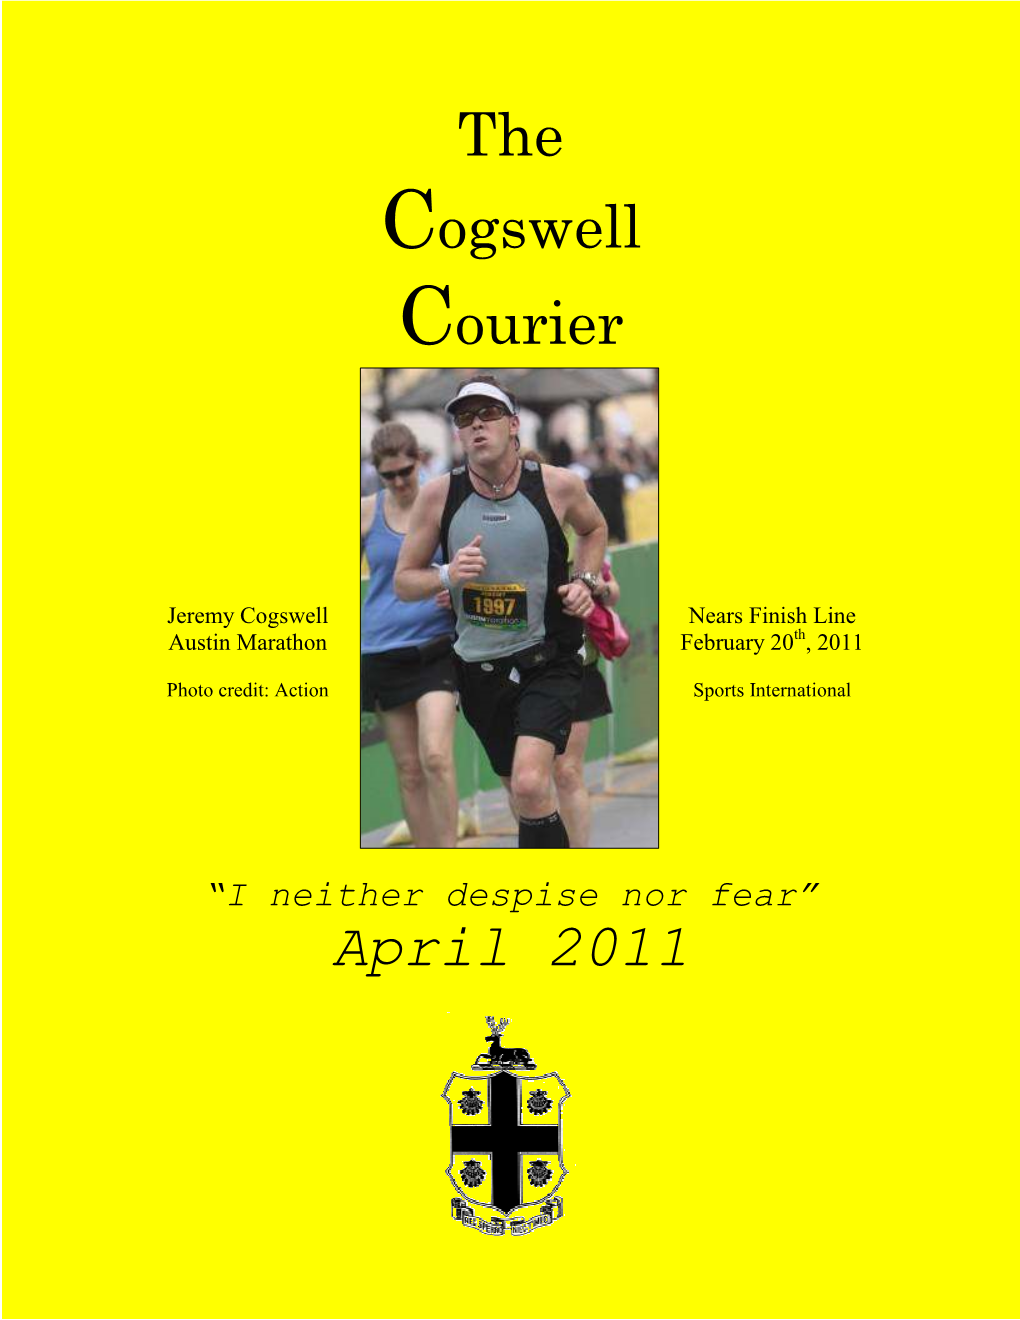 The Cogswell Courier April 2011